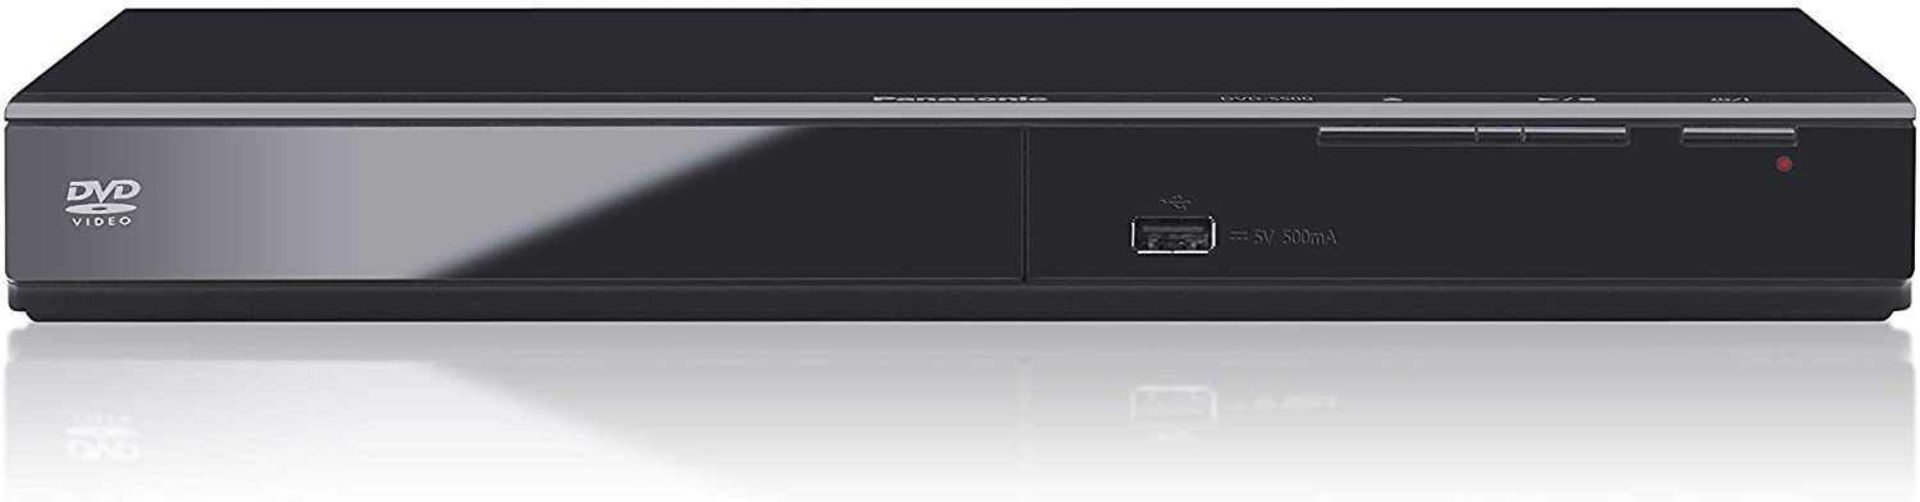 Combined RRP £180 Lot To Contain Four Boxed Assorted Cd/Dvd Players